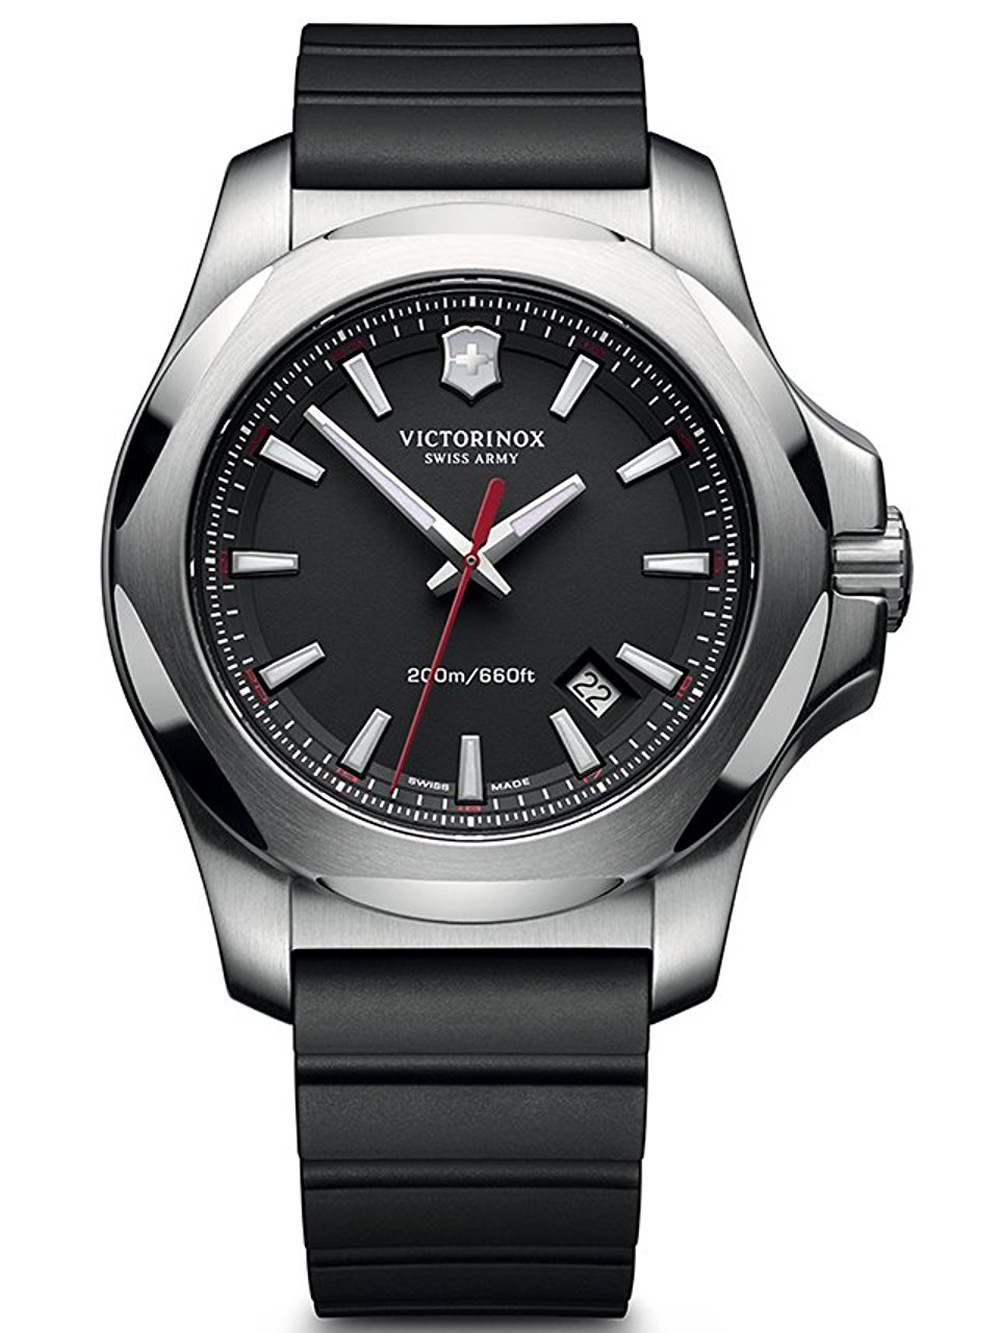 Victorinox 241682.1 I.N.O.X. Men's 43mm 20 ATM BY VICTORINOX - Wristwatch available at DOYUF